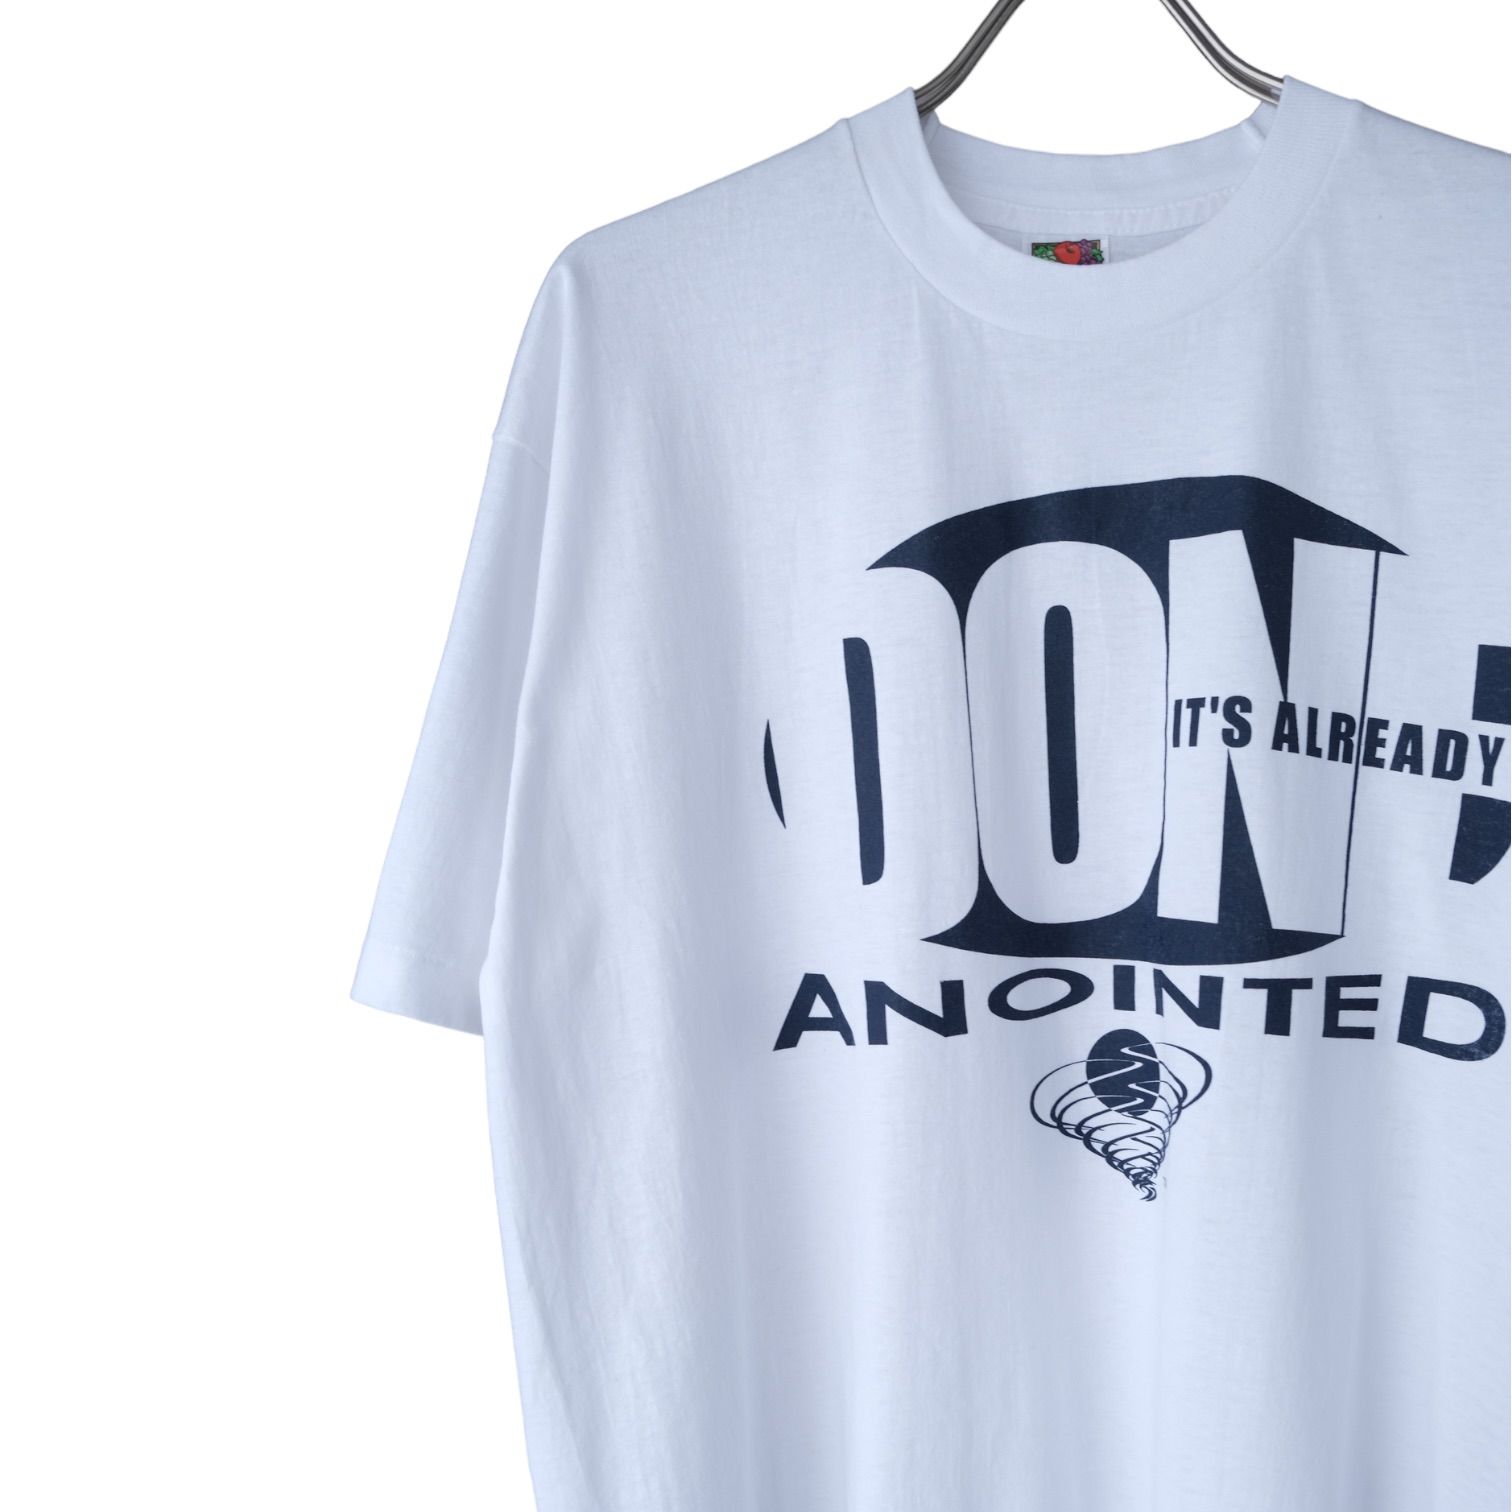 90s BEST DONE IT'S ALREADY ANOINTED - find ◎フォロワー様200円引き ...